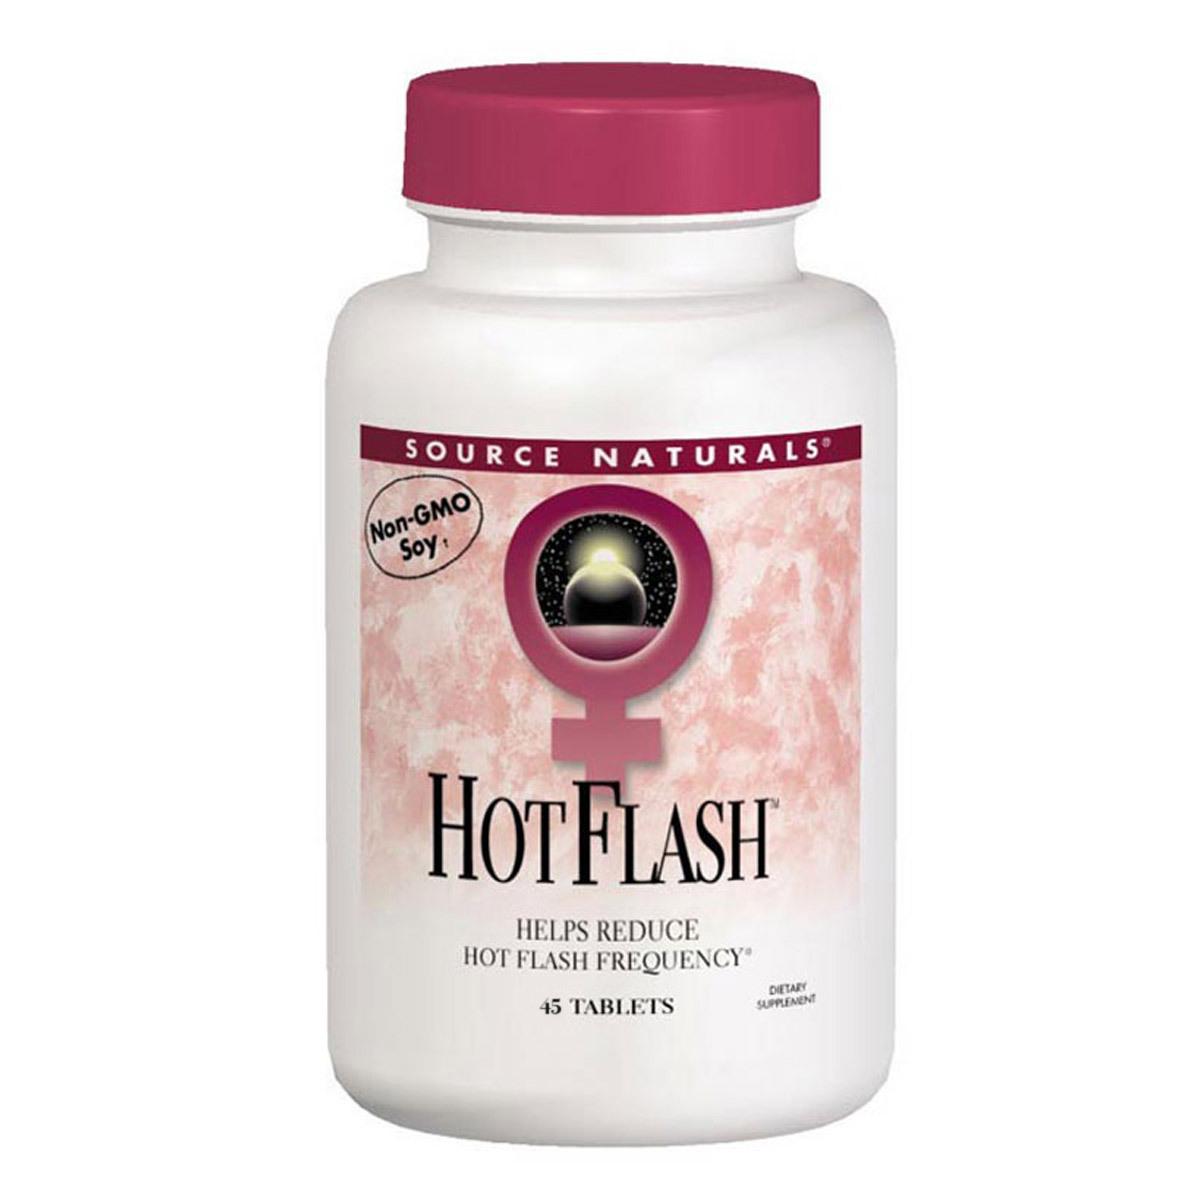 Primary image of Hot Flash